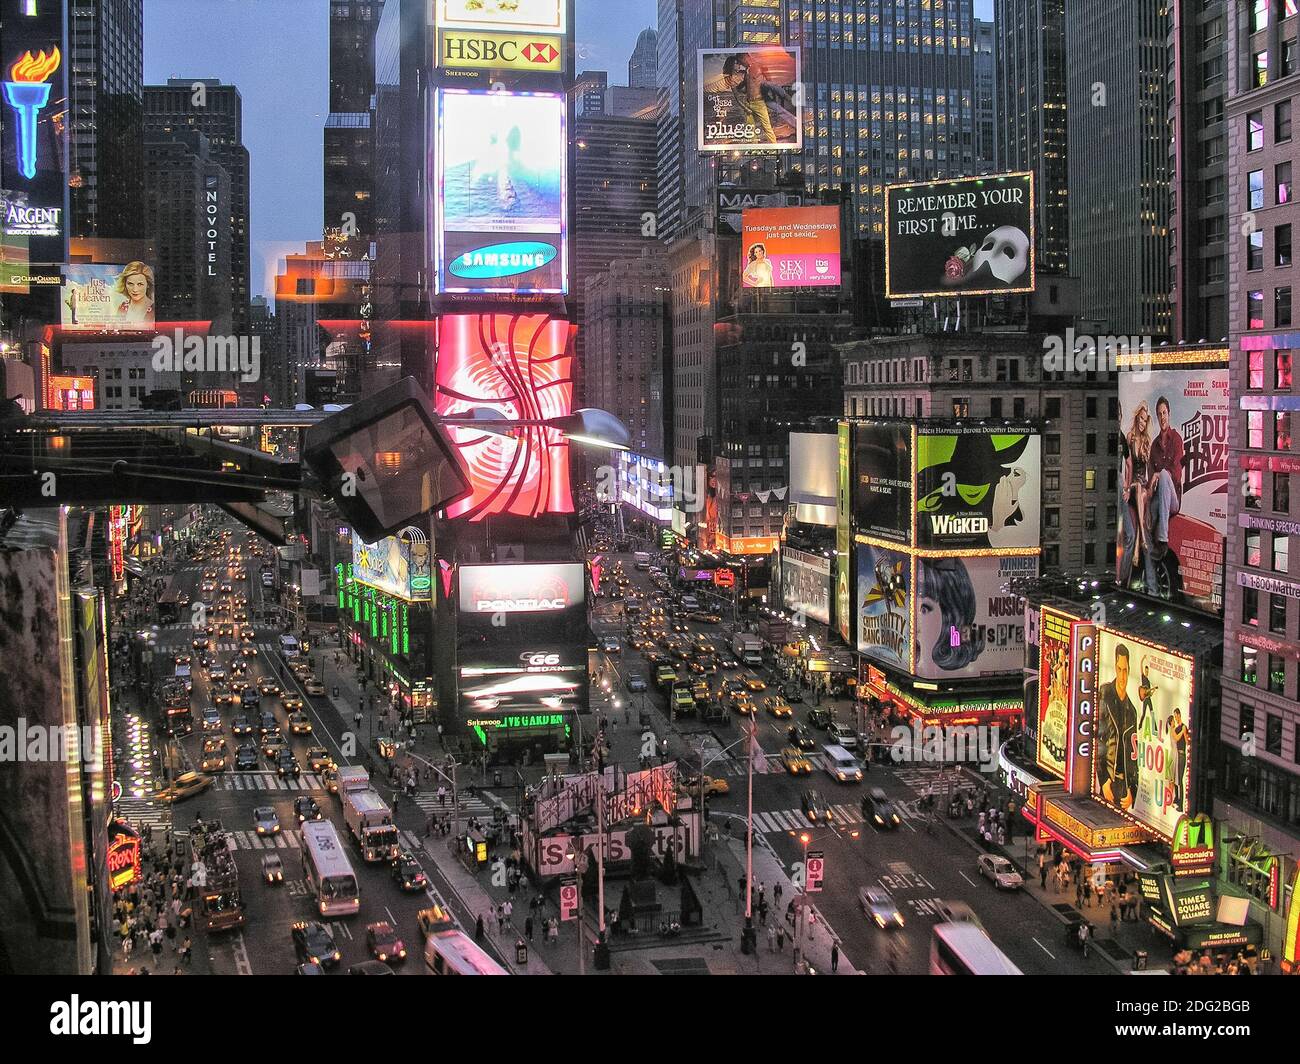 NEW YORK CITY - AUG 11: Times Square ,is a busy tourist intersection of neon art and commerce and is an iconic street of New Yor Stock Photo